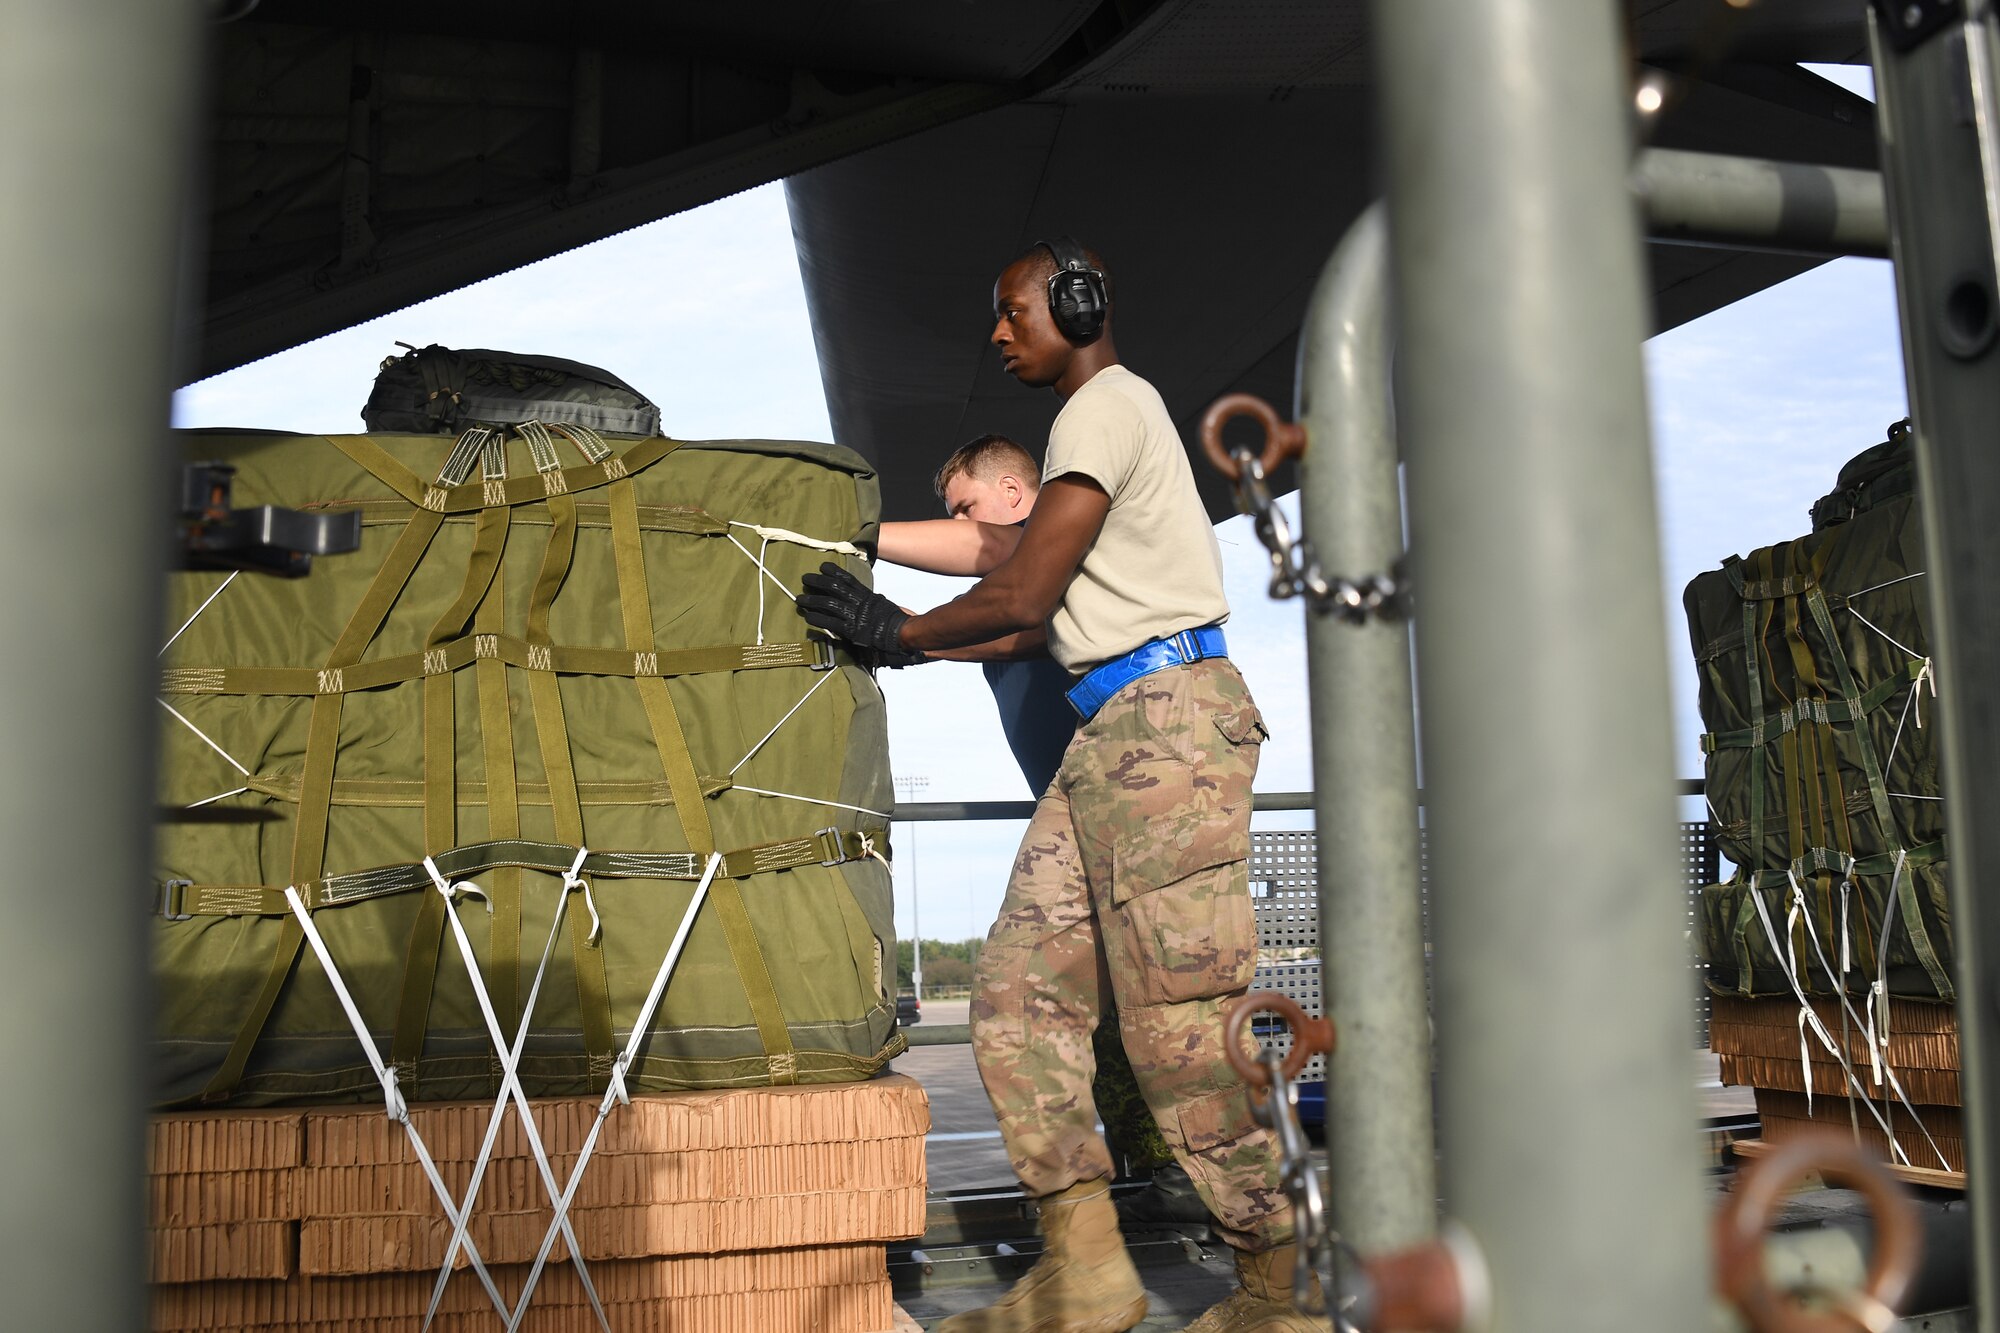 U.S. Air Force Airman 1st Class Ernest Washington, 821st Contingency Response Support Squadron aerial porter, pushes cargo onto a Royal Canadian Air Force C-130 aircraft during exercise Green Flag Little Rock, Oct. 24, 2019, Alexandria International Airport, Louisiana. During the exercise the team loaded and downloaded tactical vehicles, airdrop bundles, along with a variety of other pallets to support the Army. (U.S. Air Force photo by Tech. Sgt. Liliana Moreno)